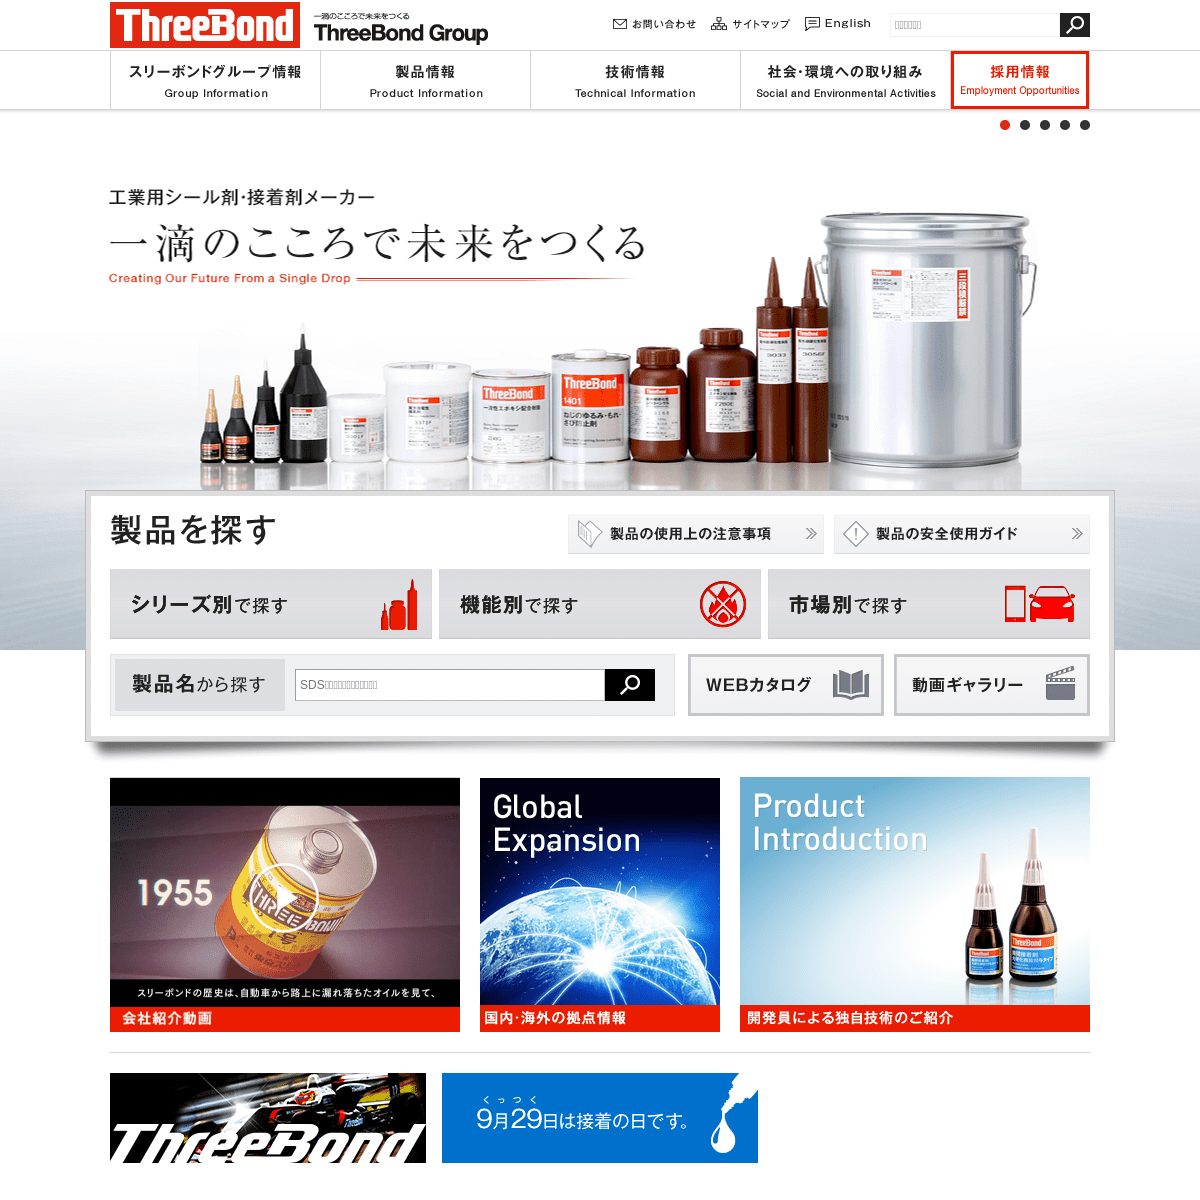 A complete backup of https://threebond.co.jp